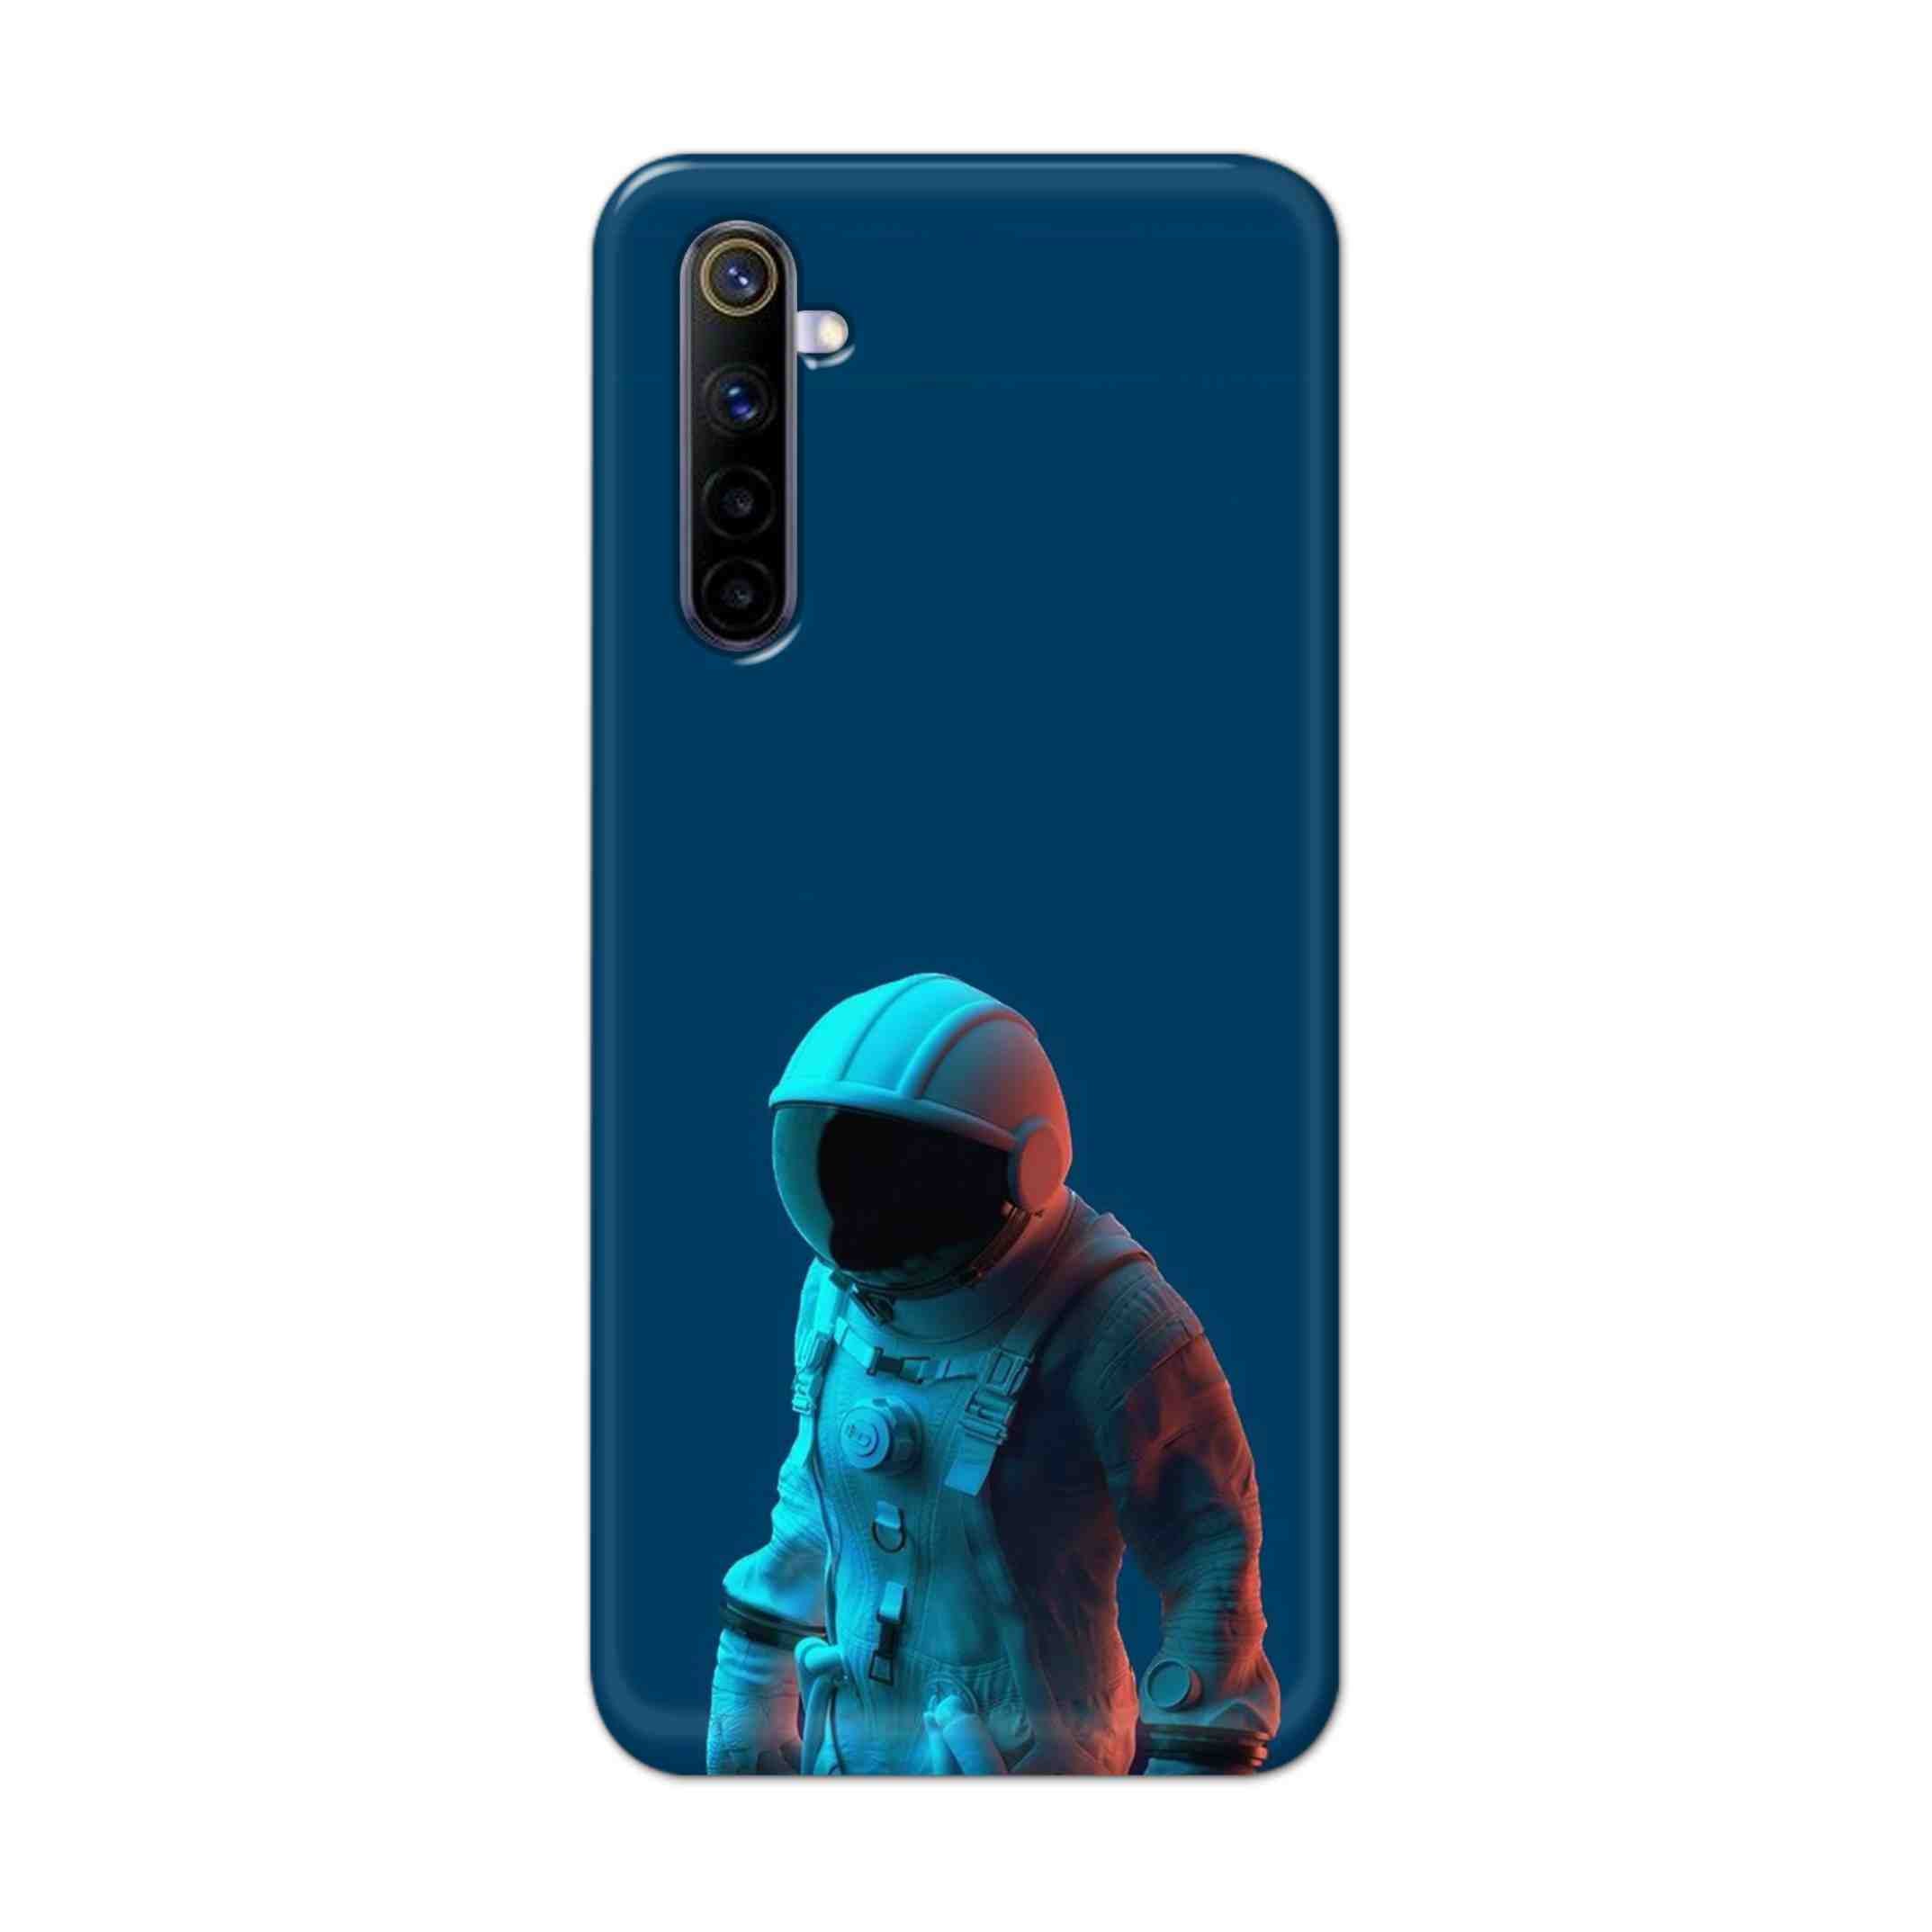 Buy Blue Astronaut Hard Back Mobile Phone Case Cover For REALME 6 PRO Online